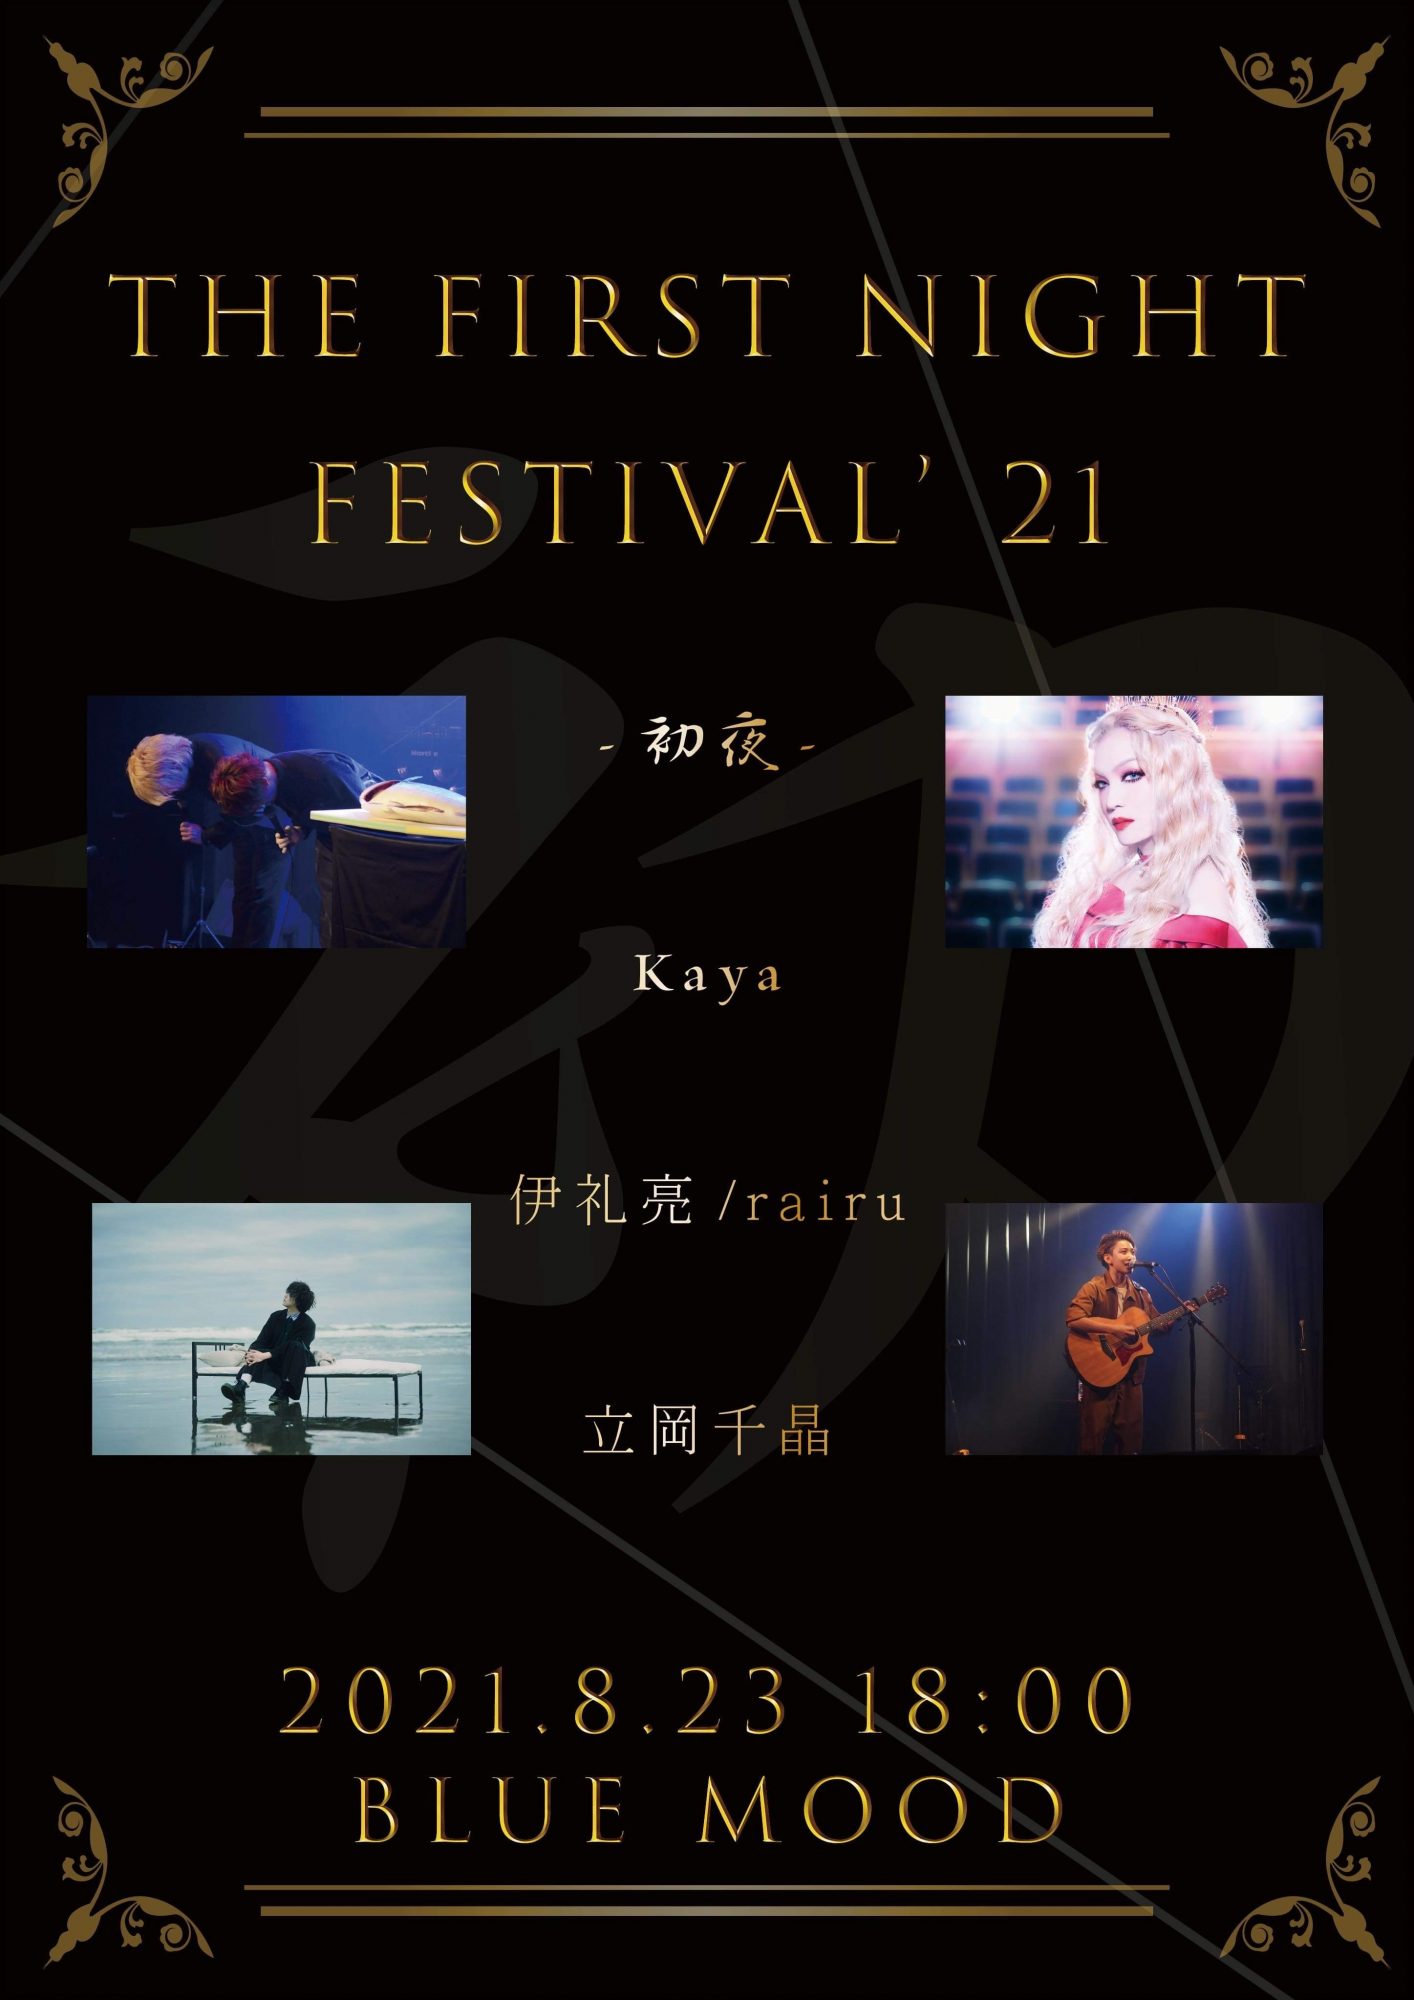 THE FIRST NIGHT FESTIVAL'21